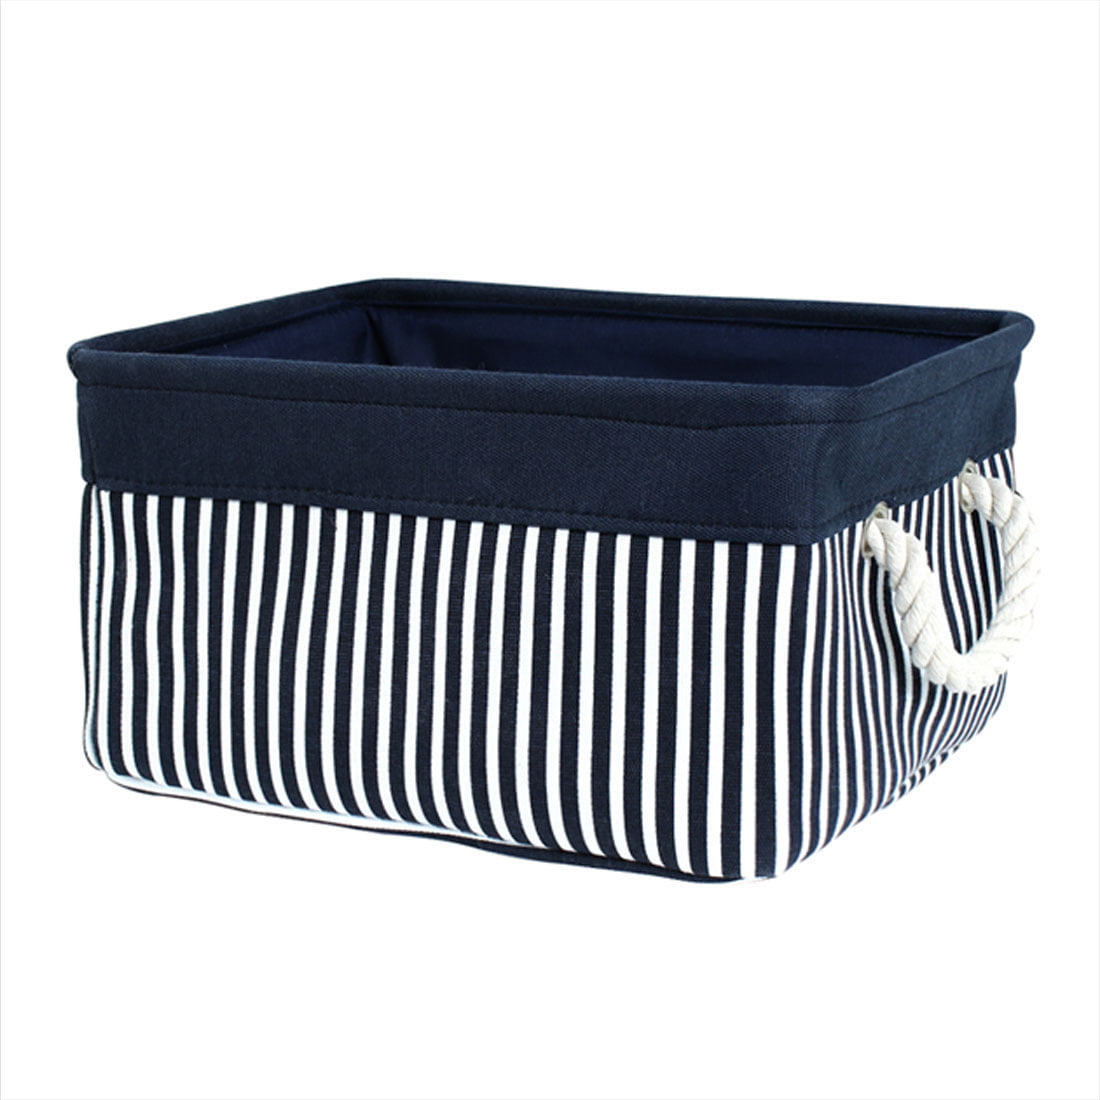 Set of 3 Foldable Cationic Fabric Storage Bin/Basket Cube with Handle and Lid 